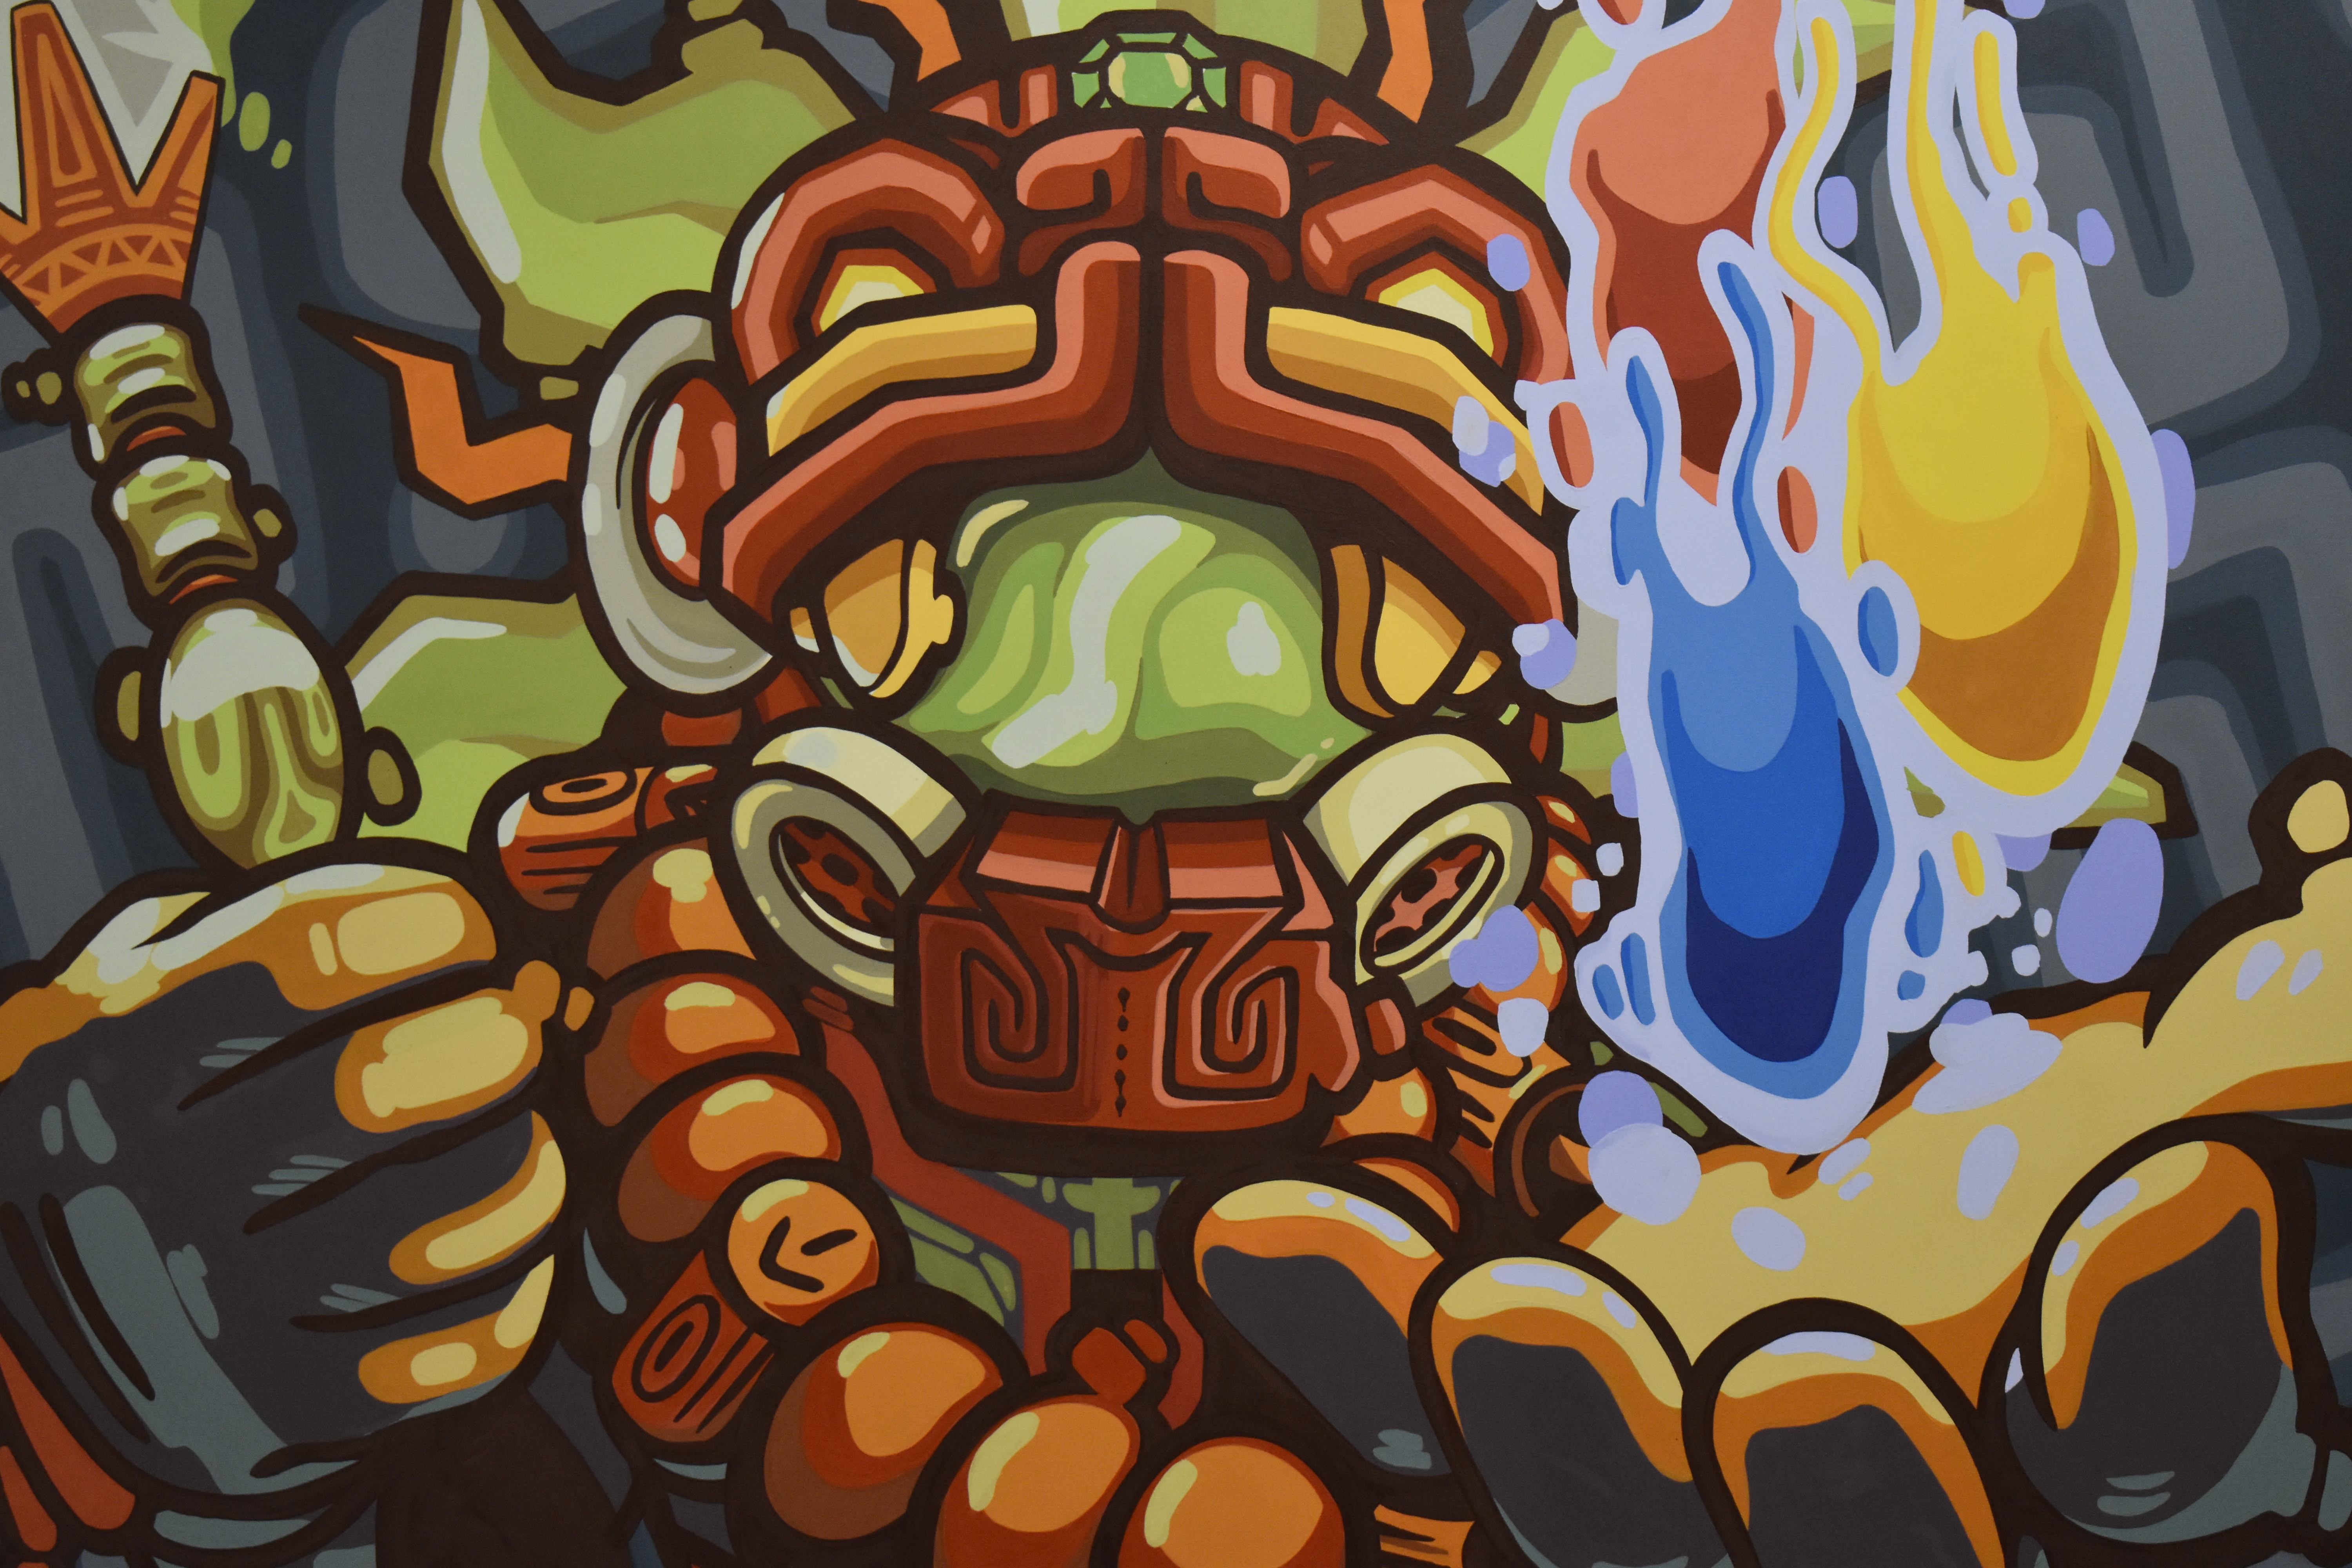 A painting of an astronaut in a Mesoamerican style by Jake Messa.